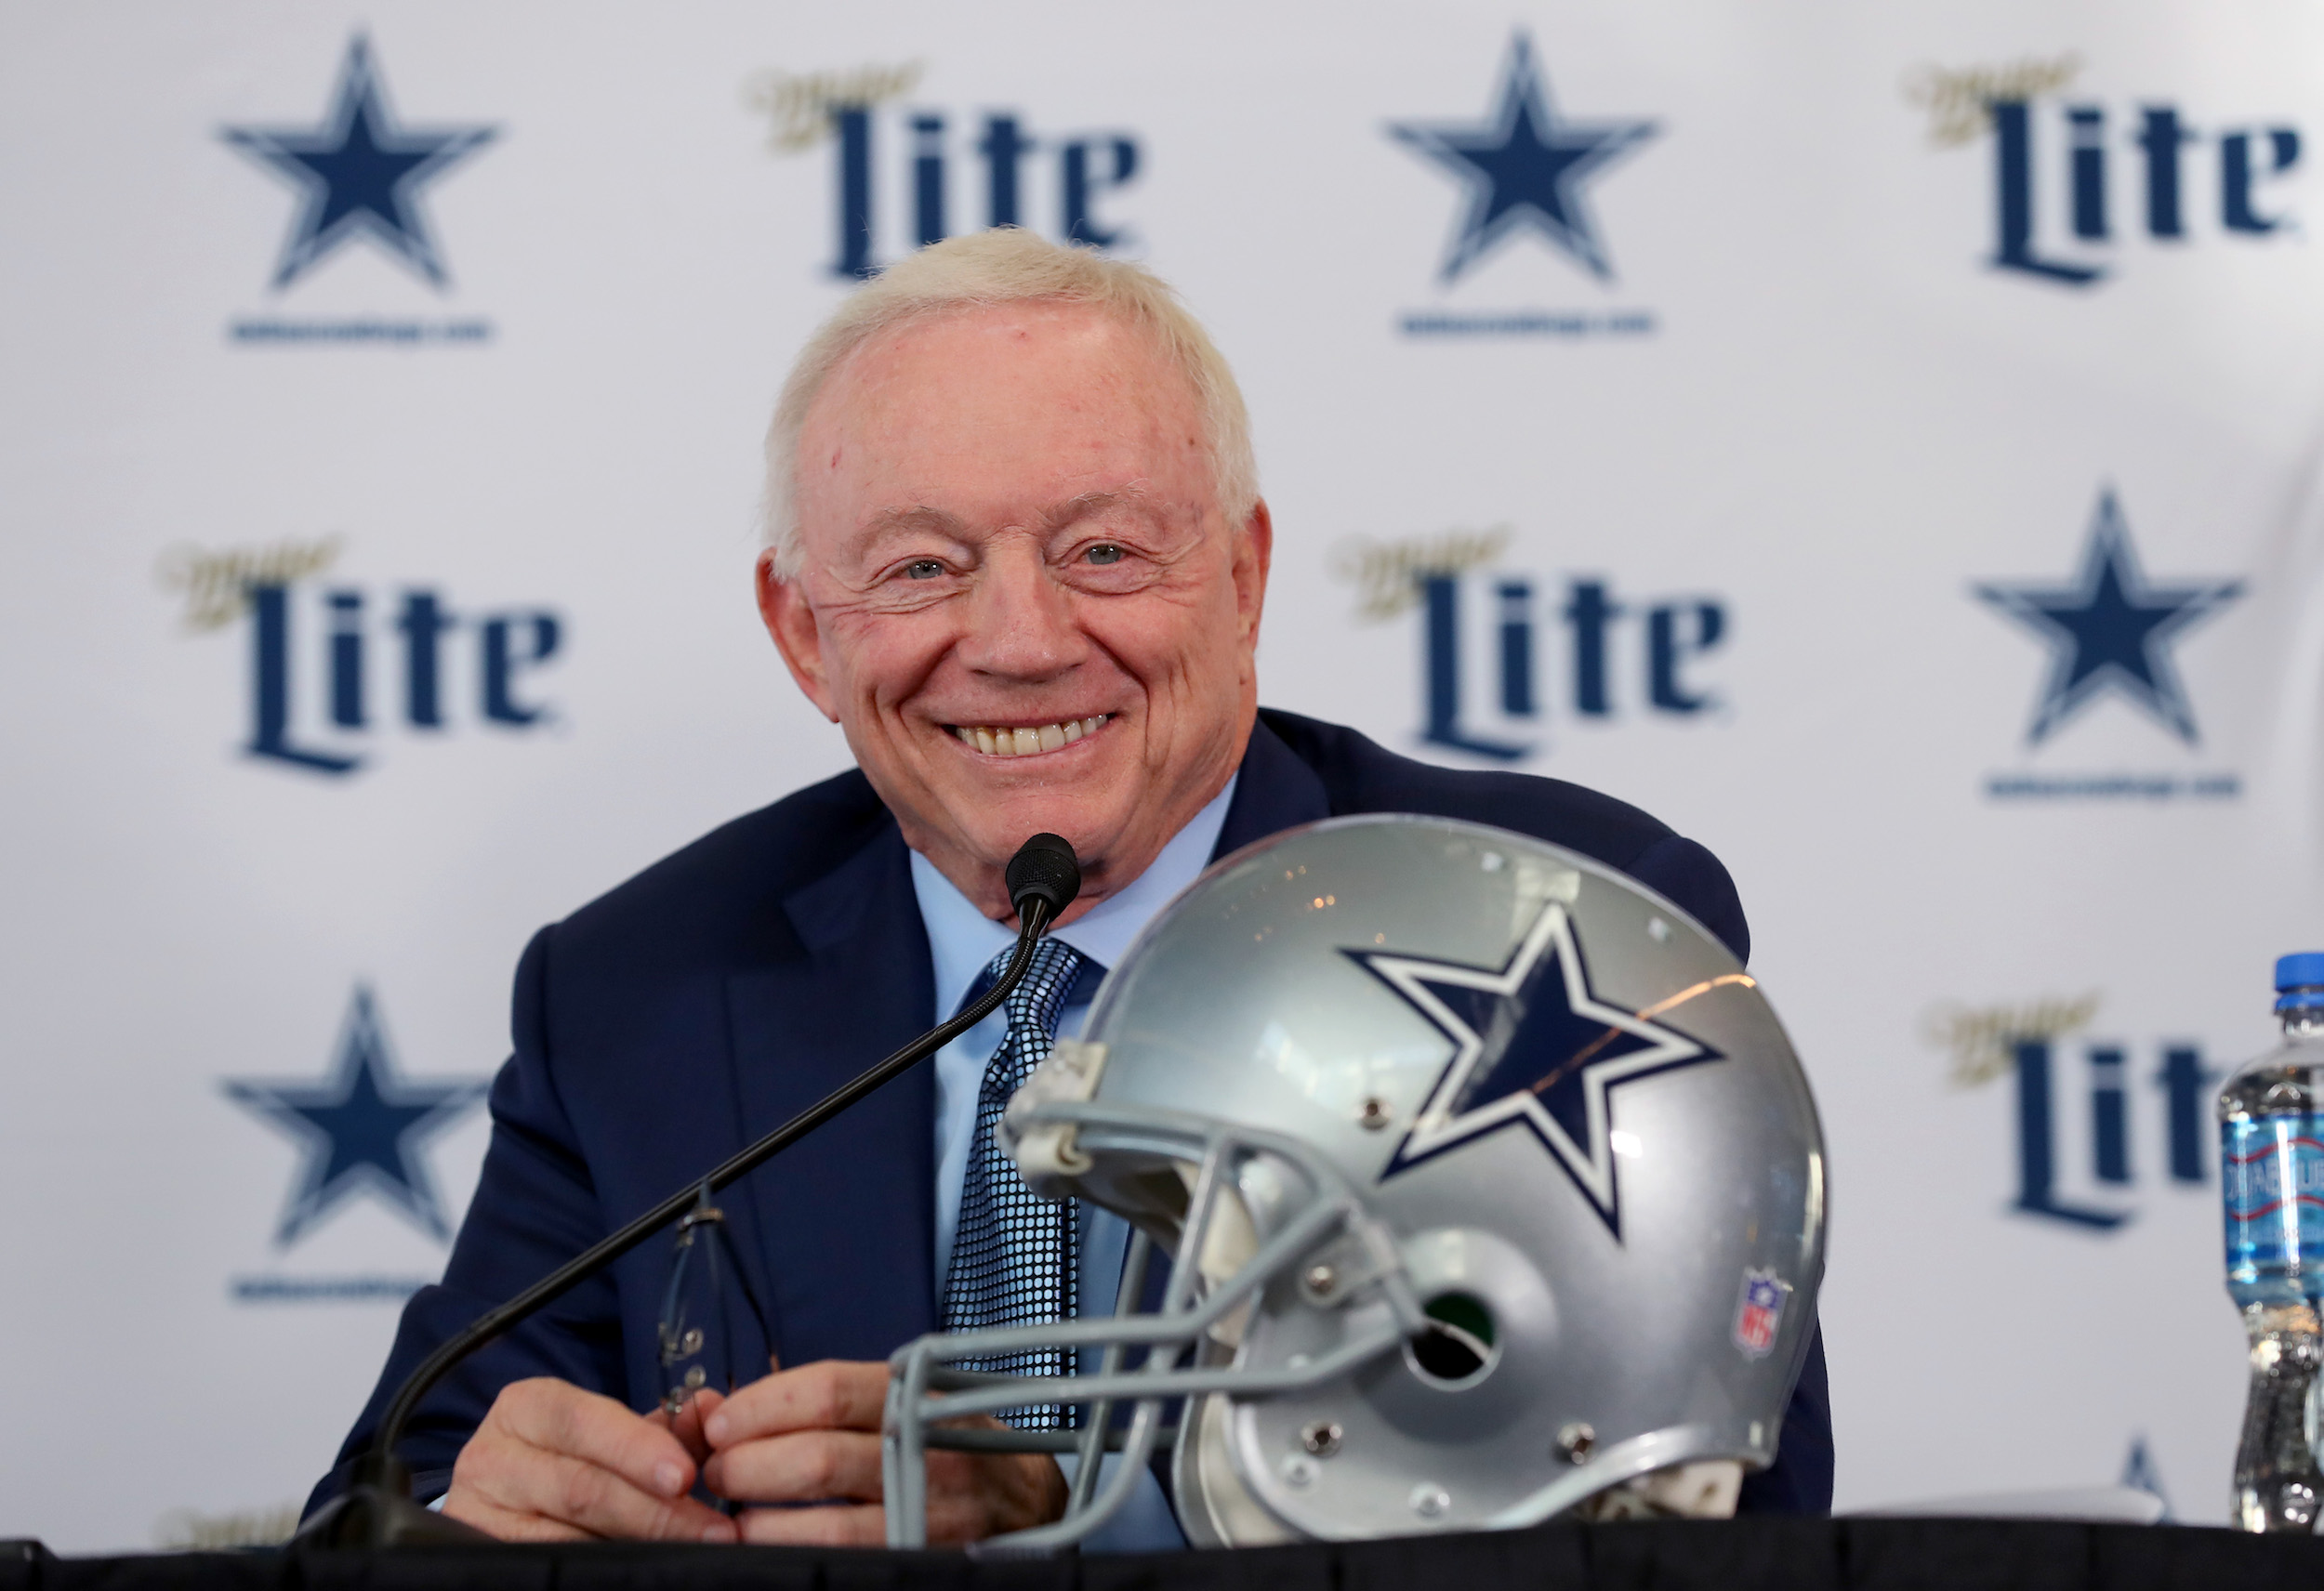 As a child in Arkansas, Jerry Jones learned that showmanship was the key to business success.